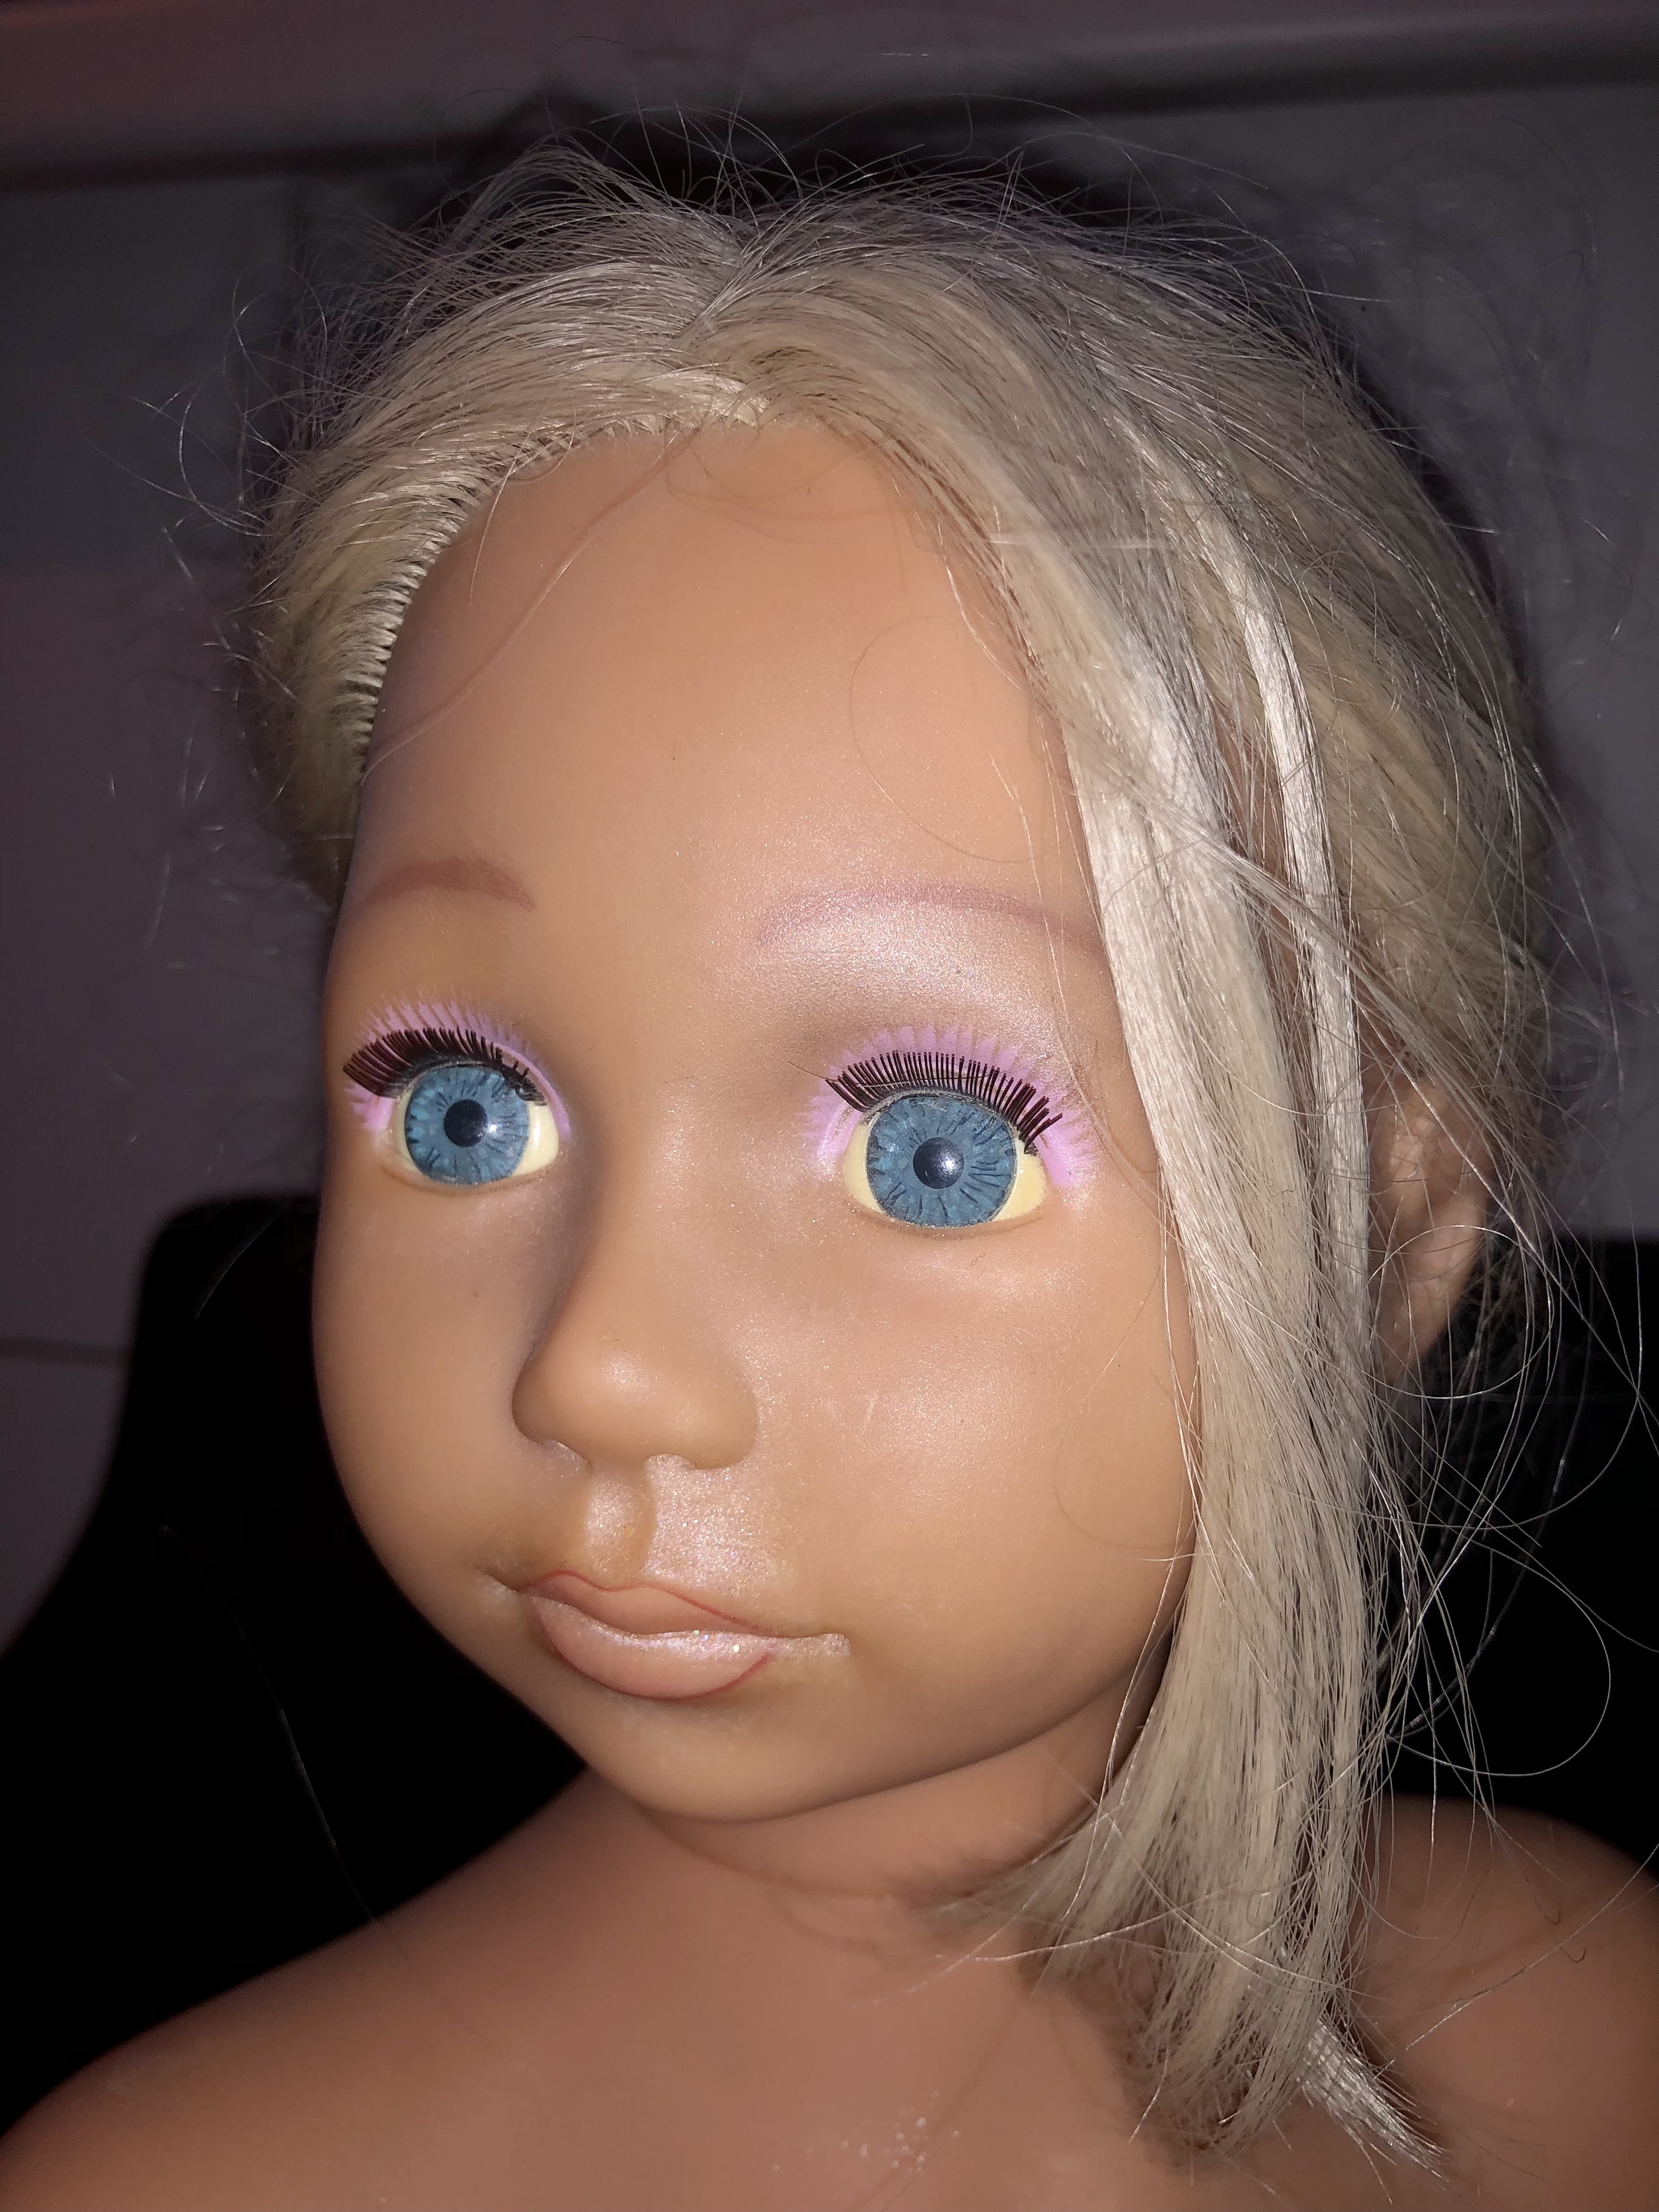 Cute smelly second hand store hairdresser doll